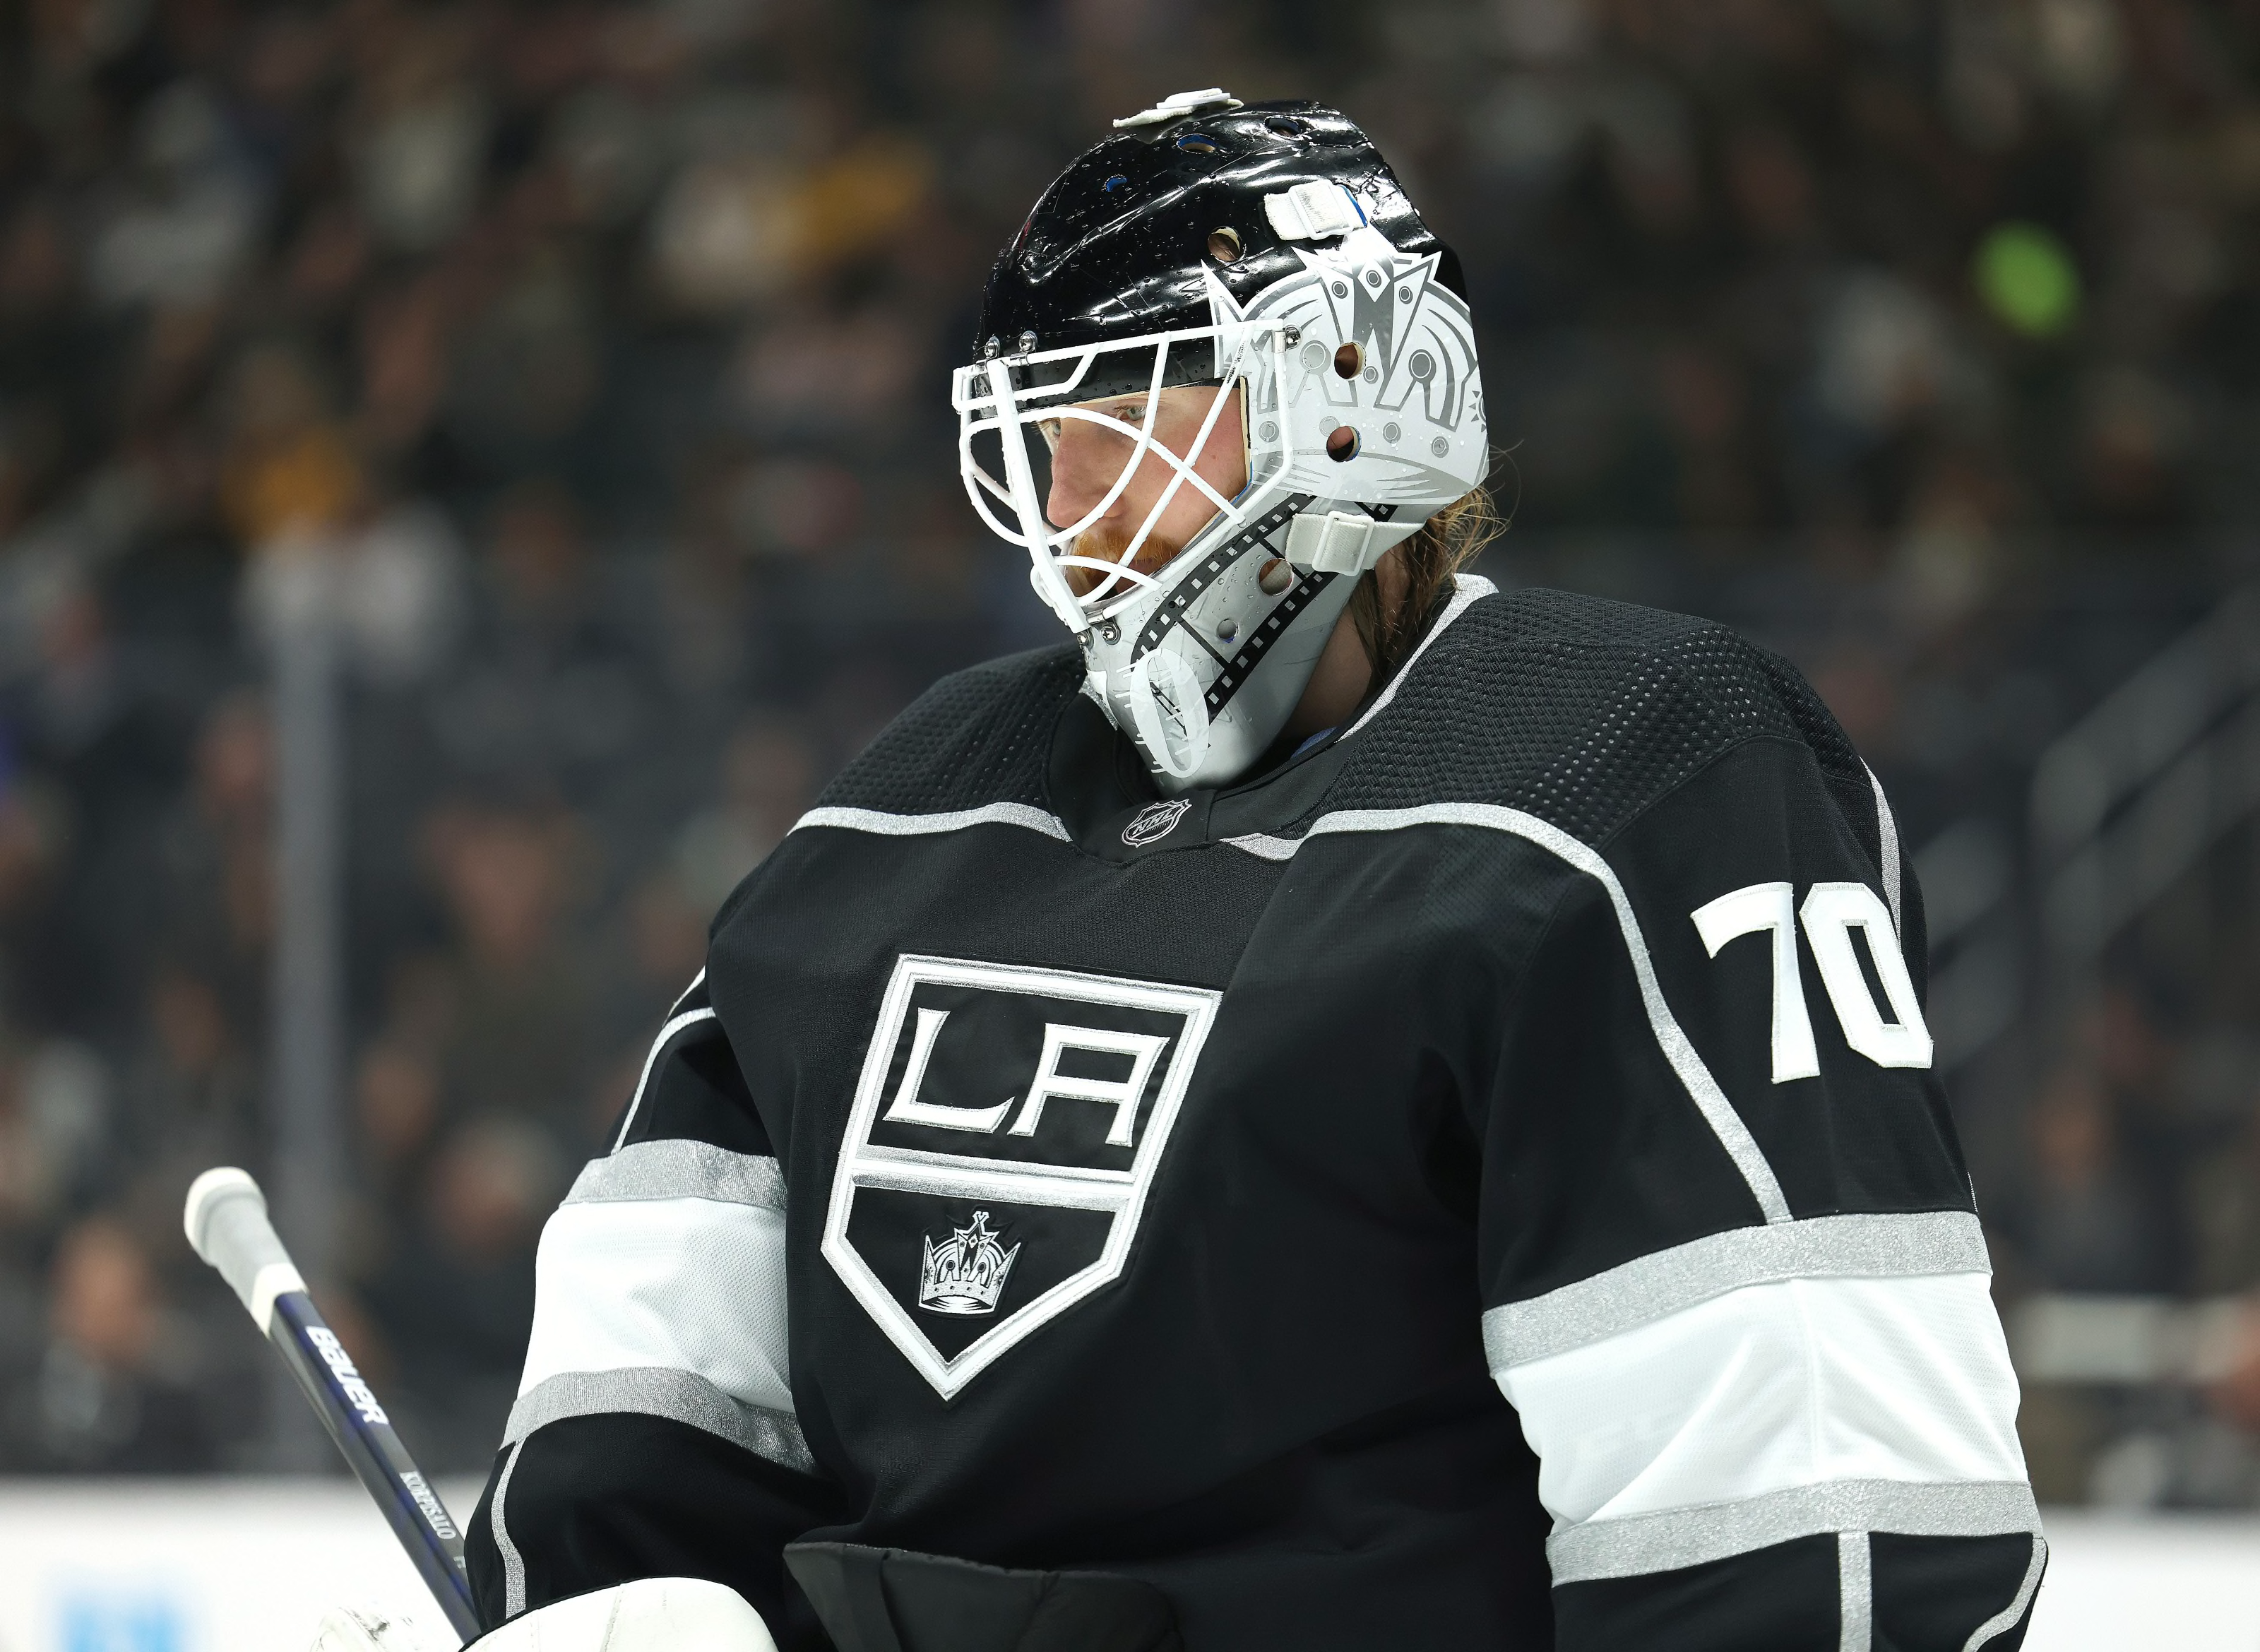 UPDATED: LA Kings to Wear Five Different Jerseys This Season